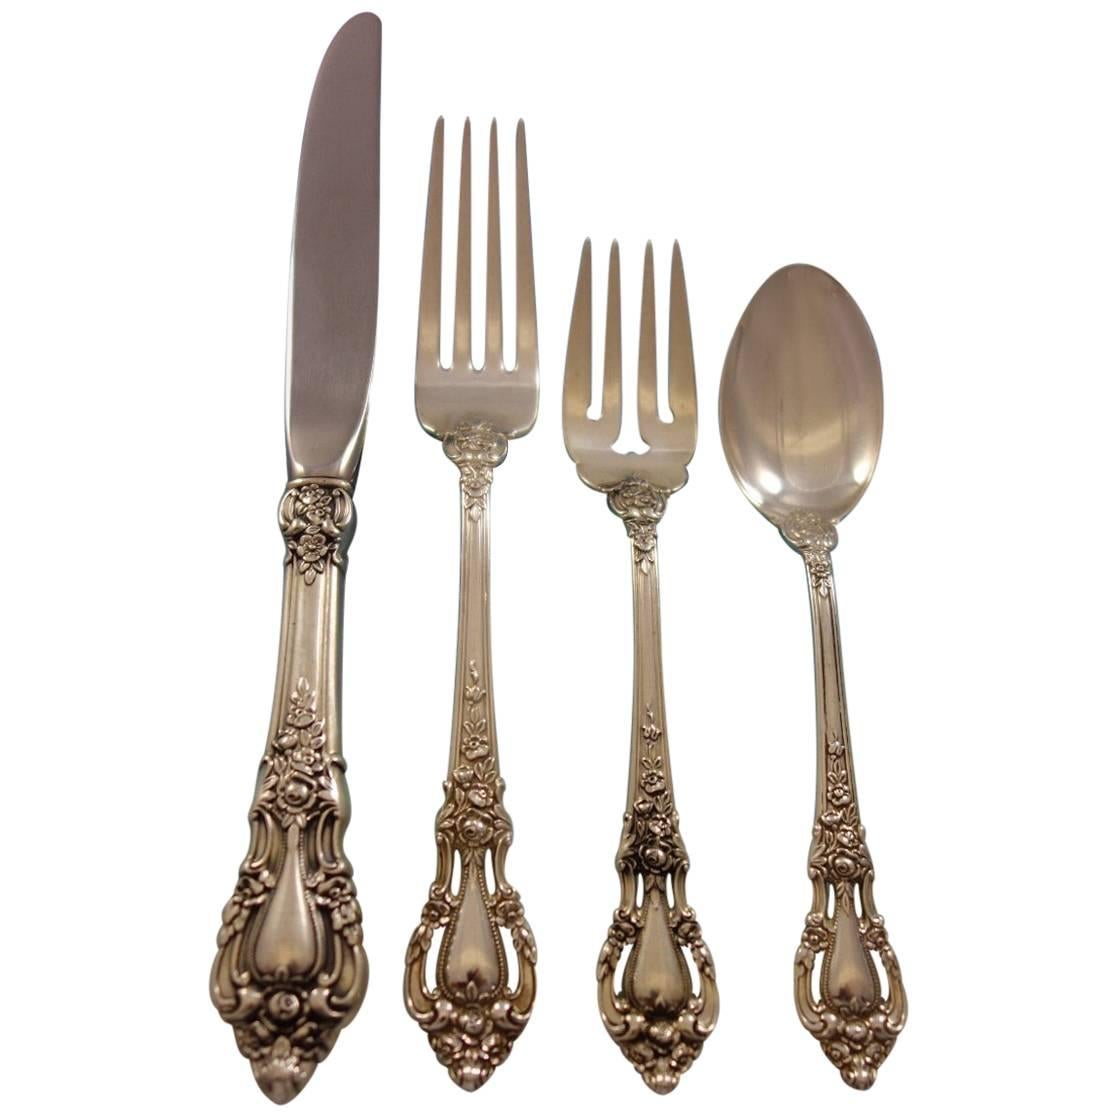 Eloquence by Lunt Sterling Silver Flatware Service Set 48 Pieces Dinner Size For Sale